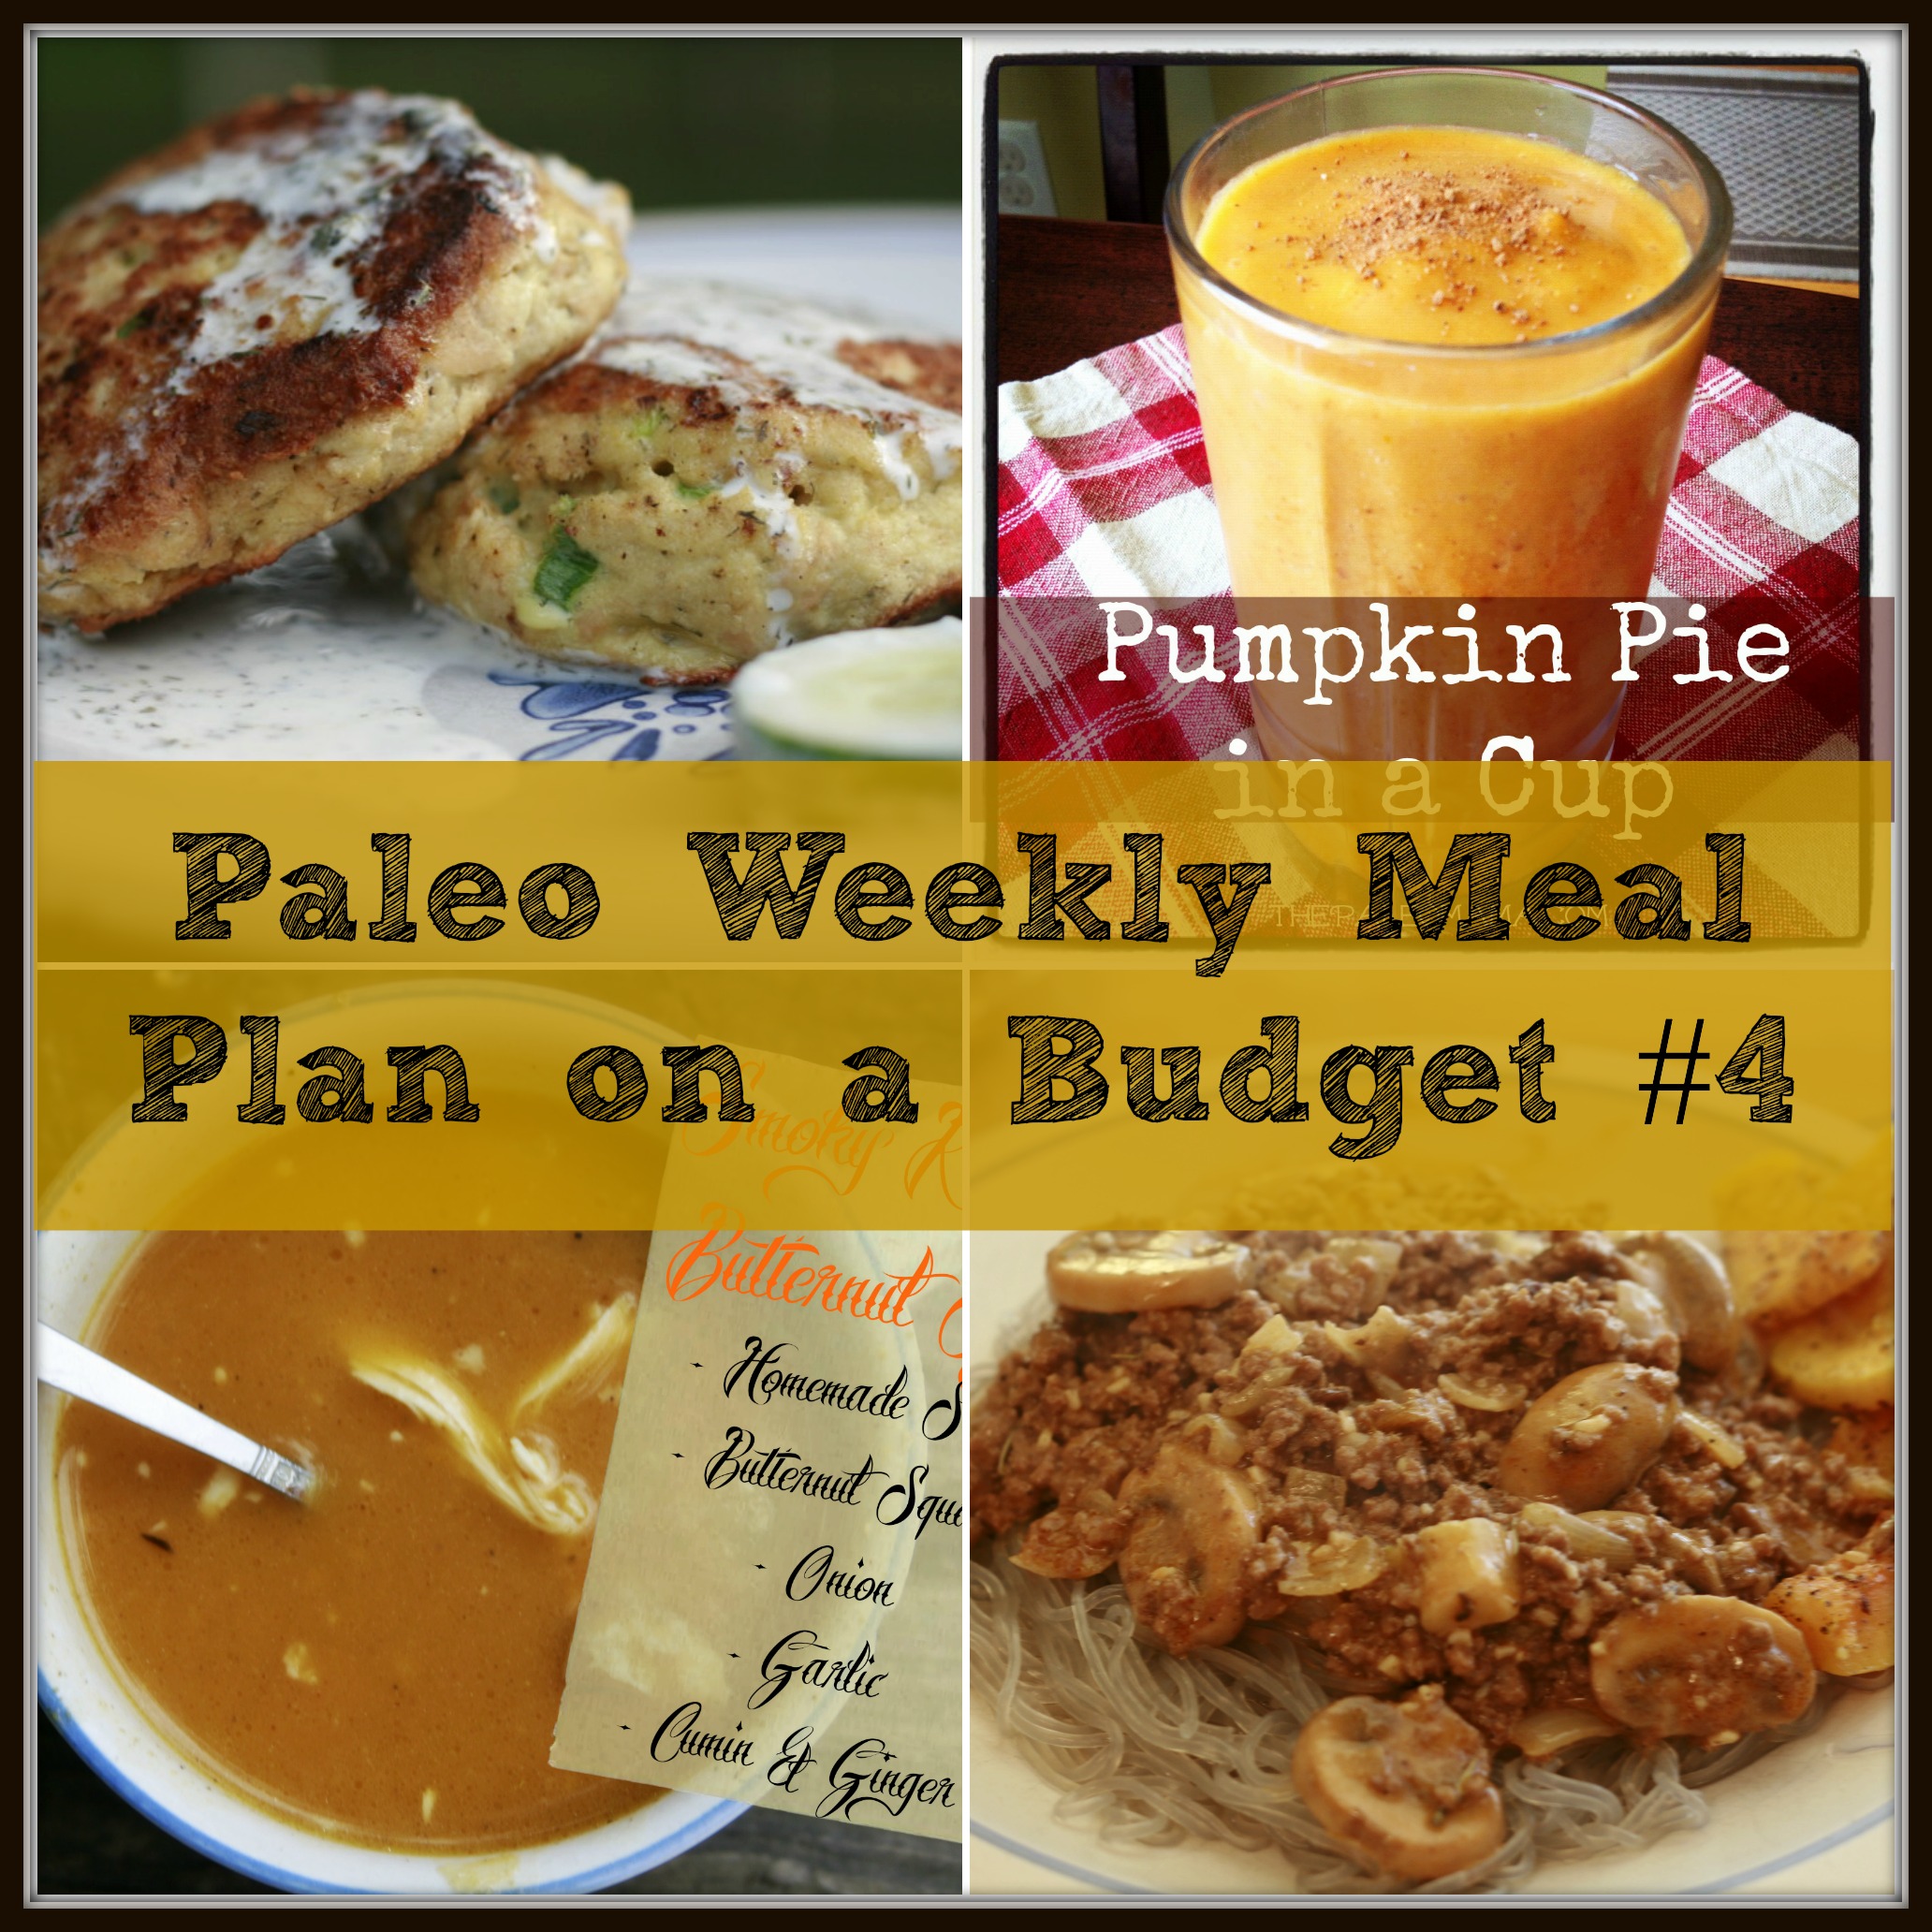 Paleo Weekly Meal Plan on a Budget #4